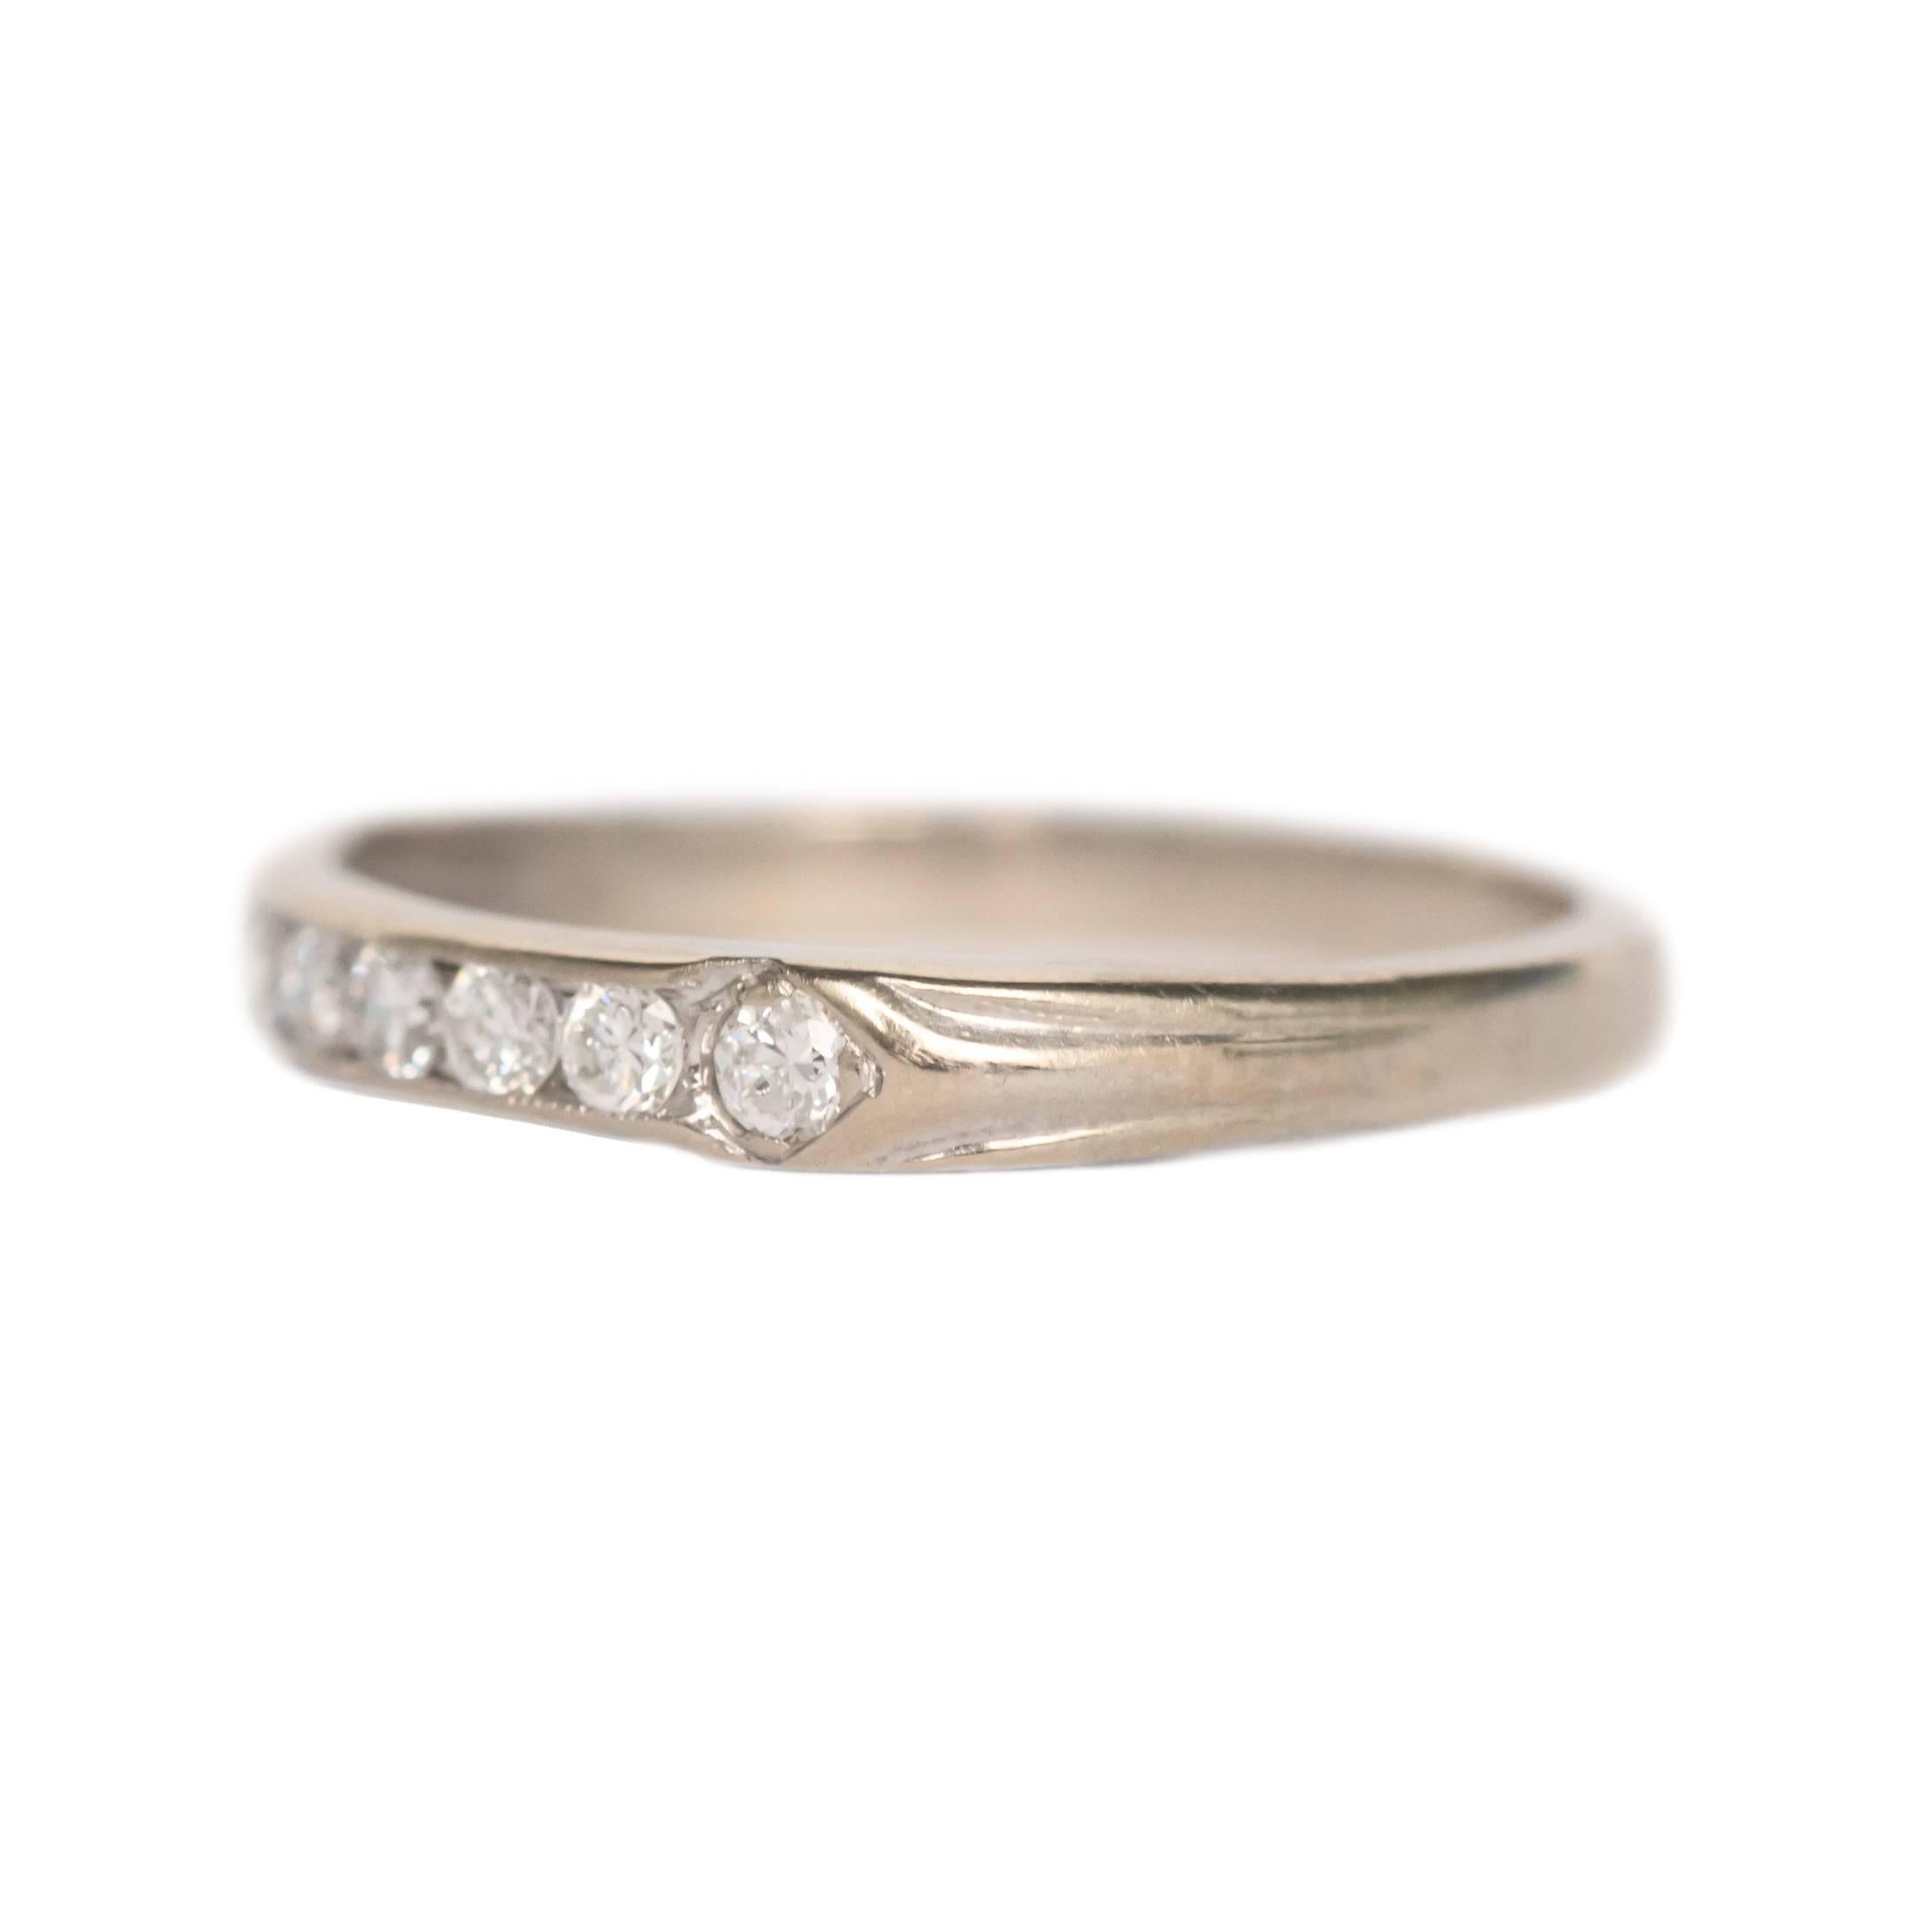 Item Details: 
Ring Size: Approximately 4.40
Metal Type: Platinum
Weight: 1.4 grams

Diamond Details:
Shape: Antique Single Cut
Carat Weight: .10 carat, total weight
Color: E
Clarity: VS1

Width of band: 2.29 mm
Finger to Top of Stone Measurement: